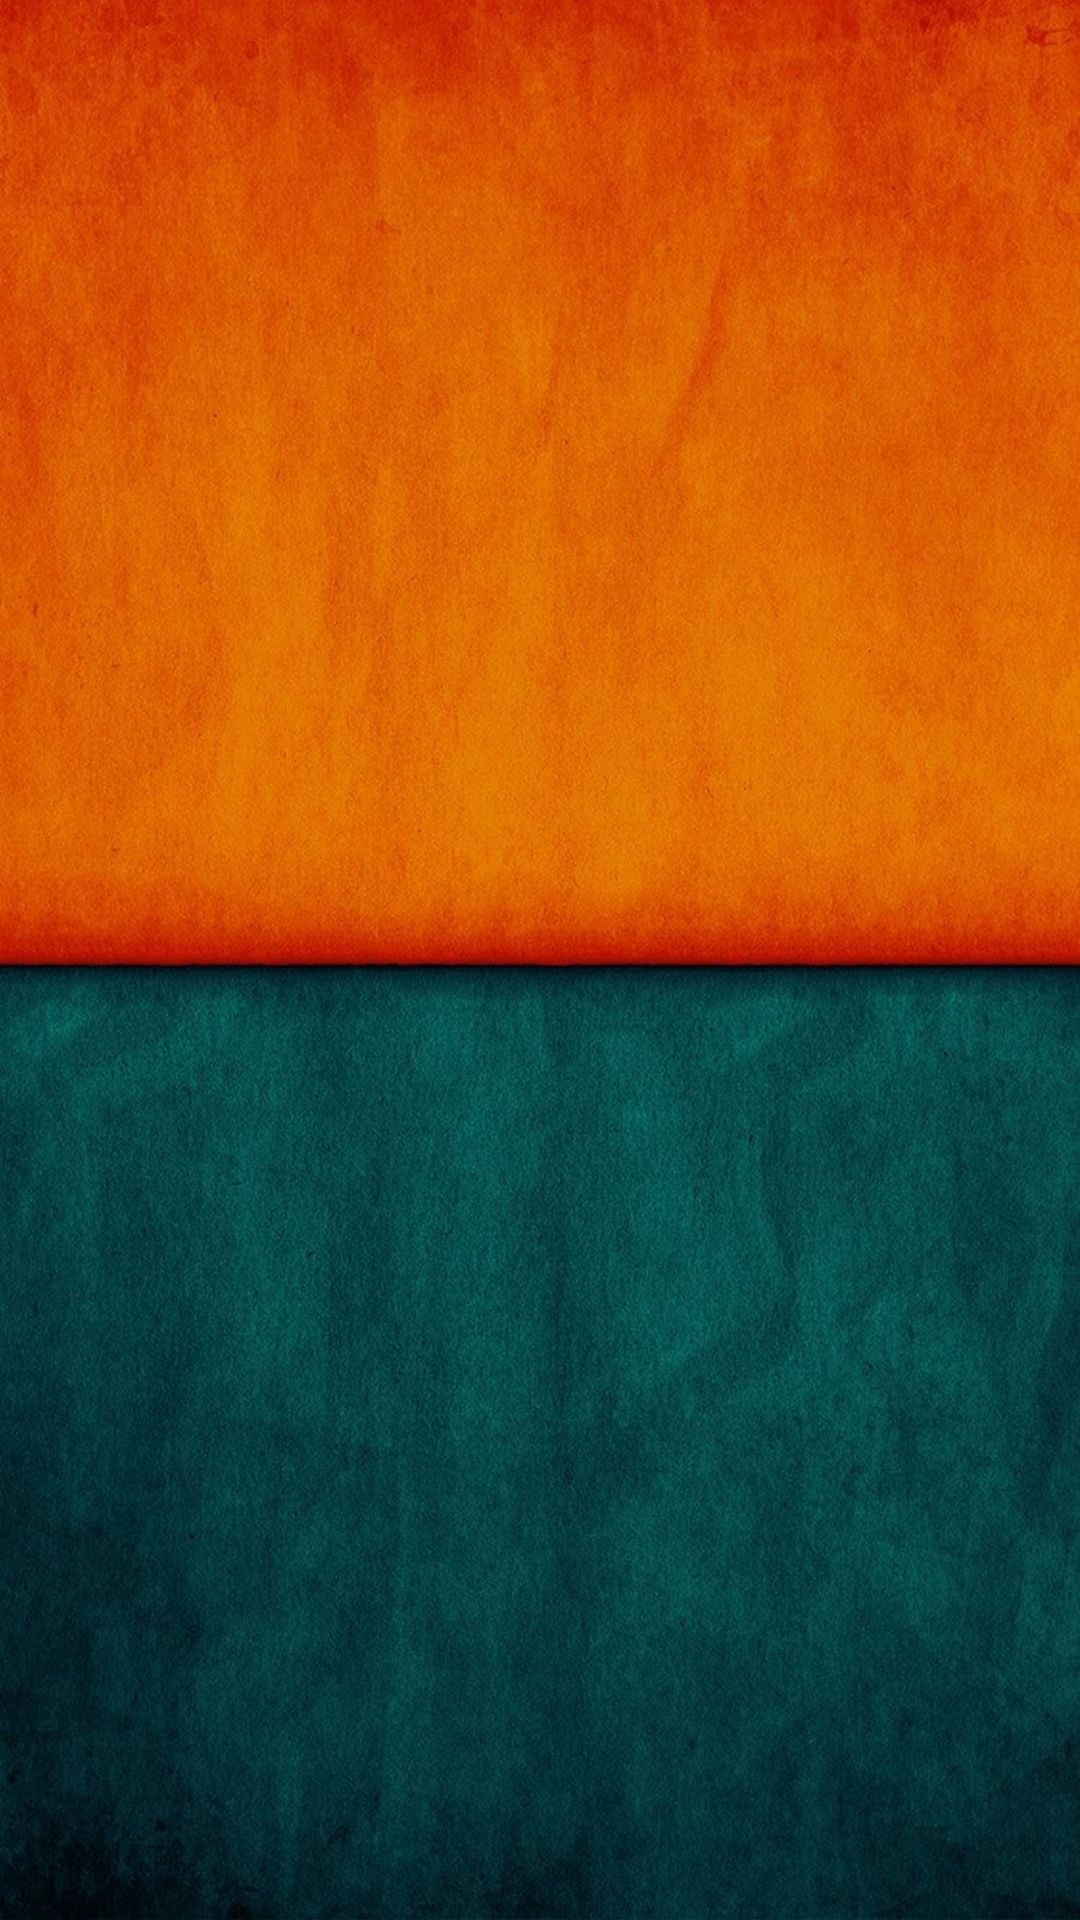 1080x1920 Orange and Green Wallpapers Top Free Orange and Green Backgrounds